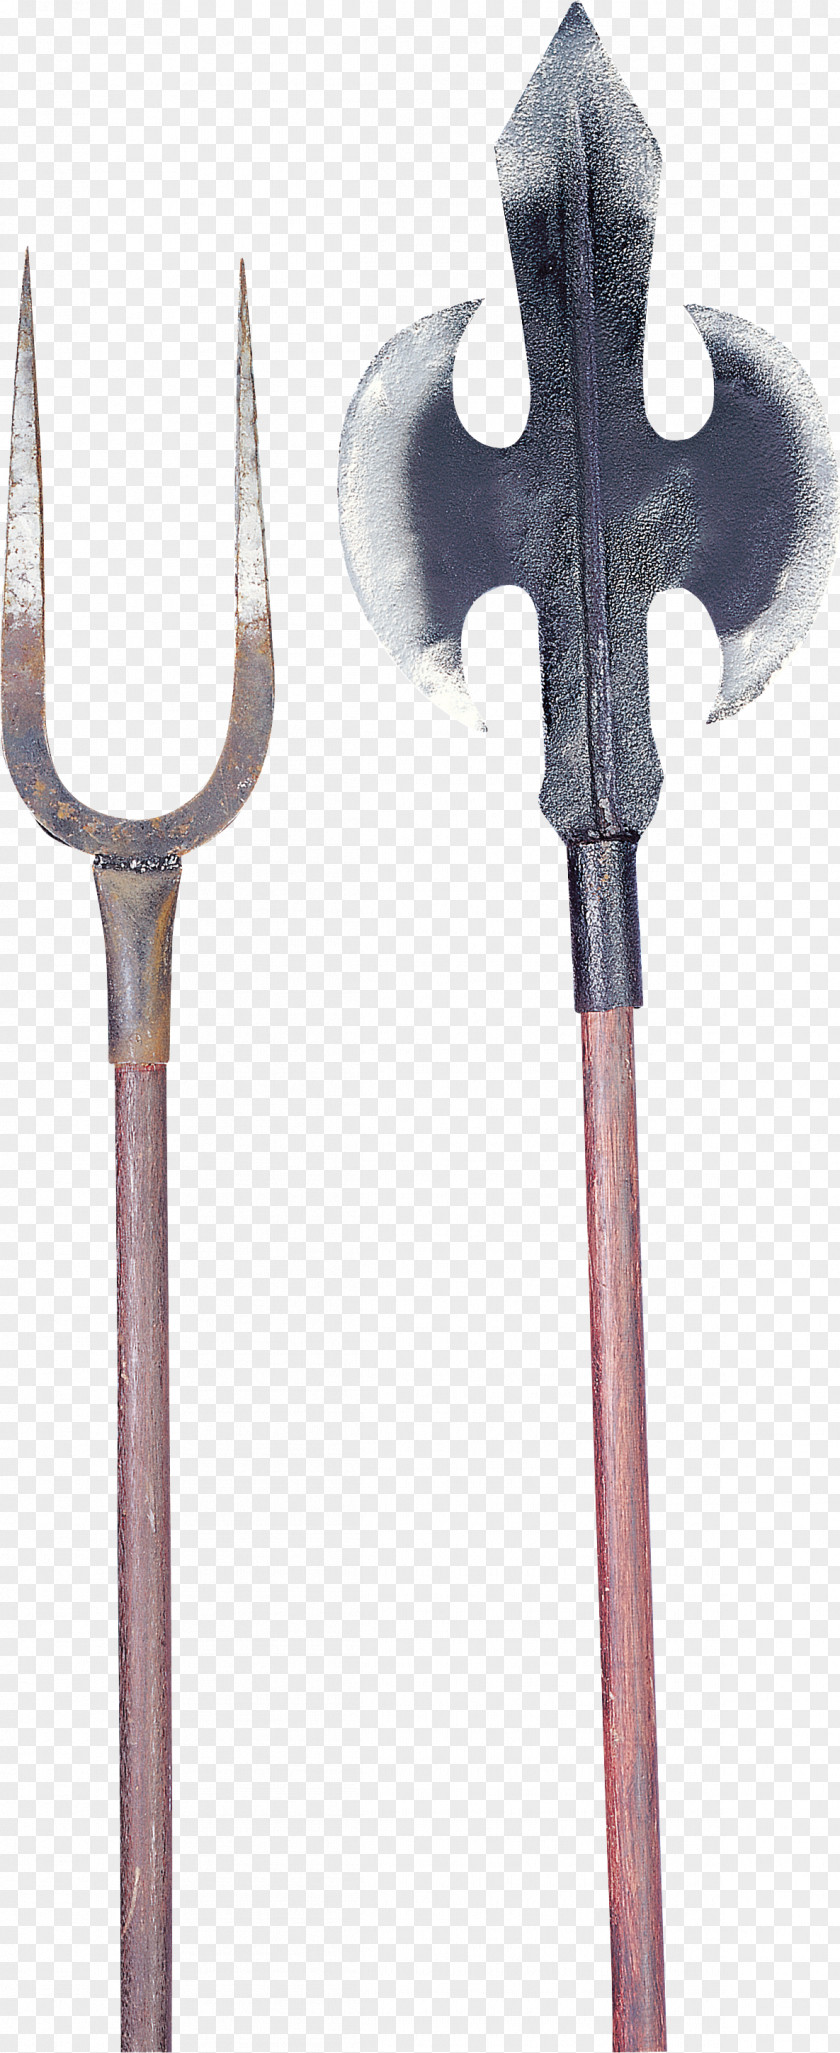 Plier Weapon Trident Tool Gardening Forks Clip Art PNG